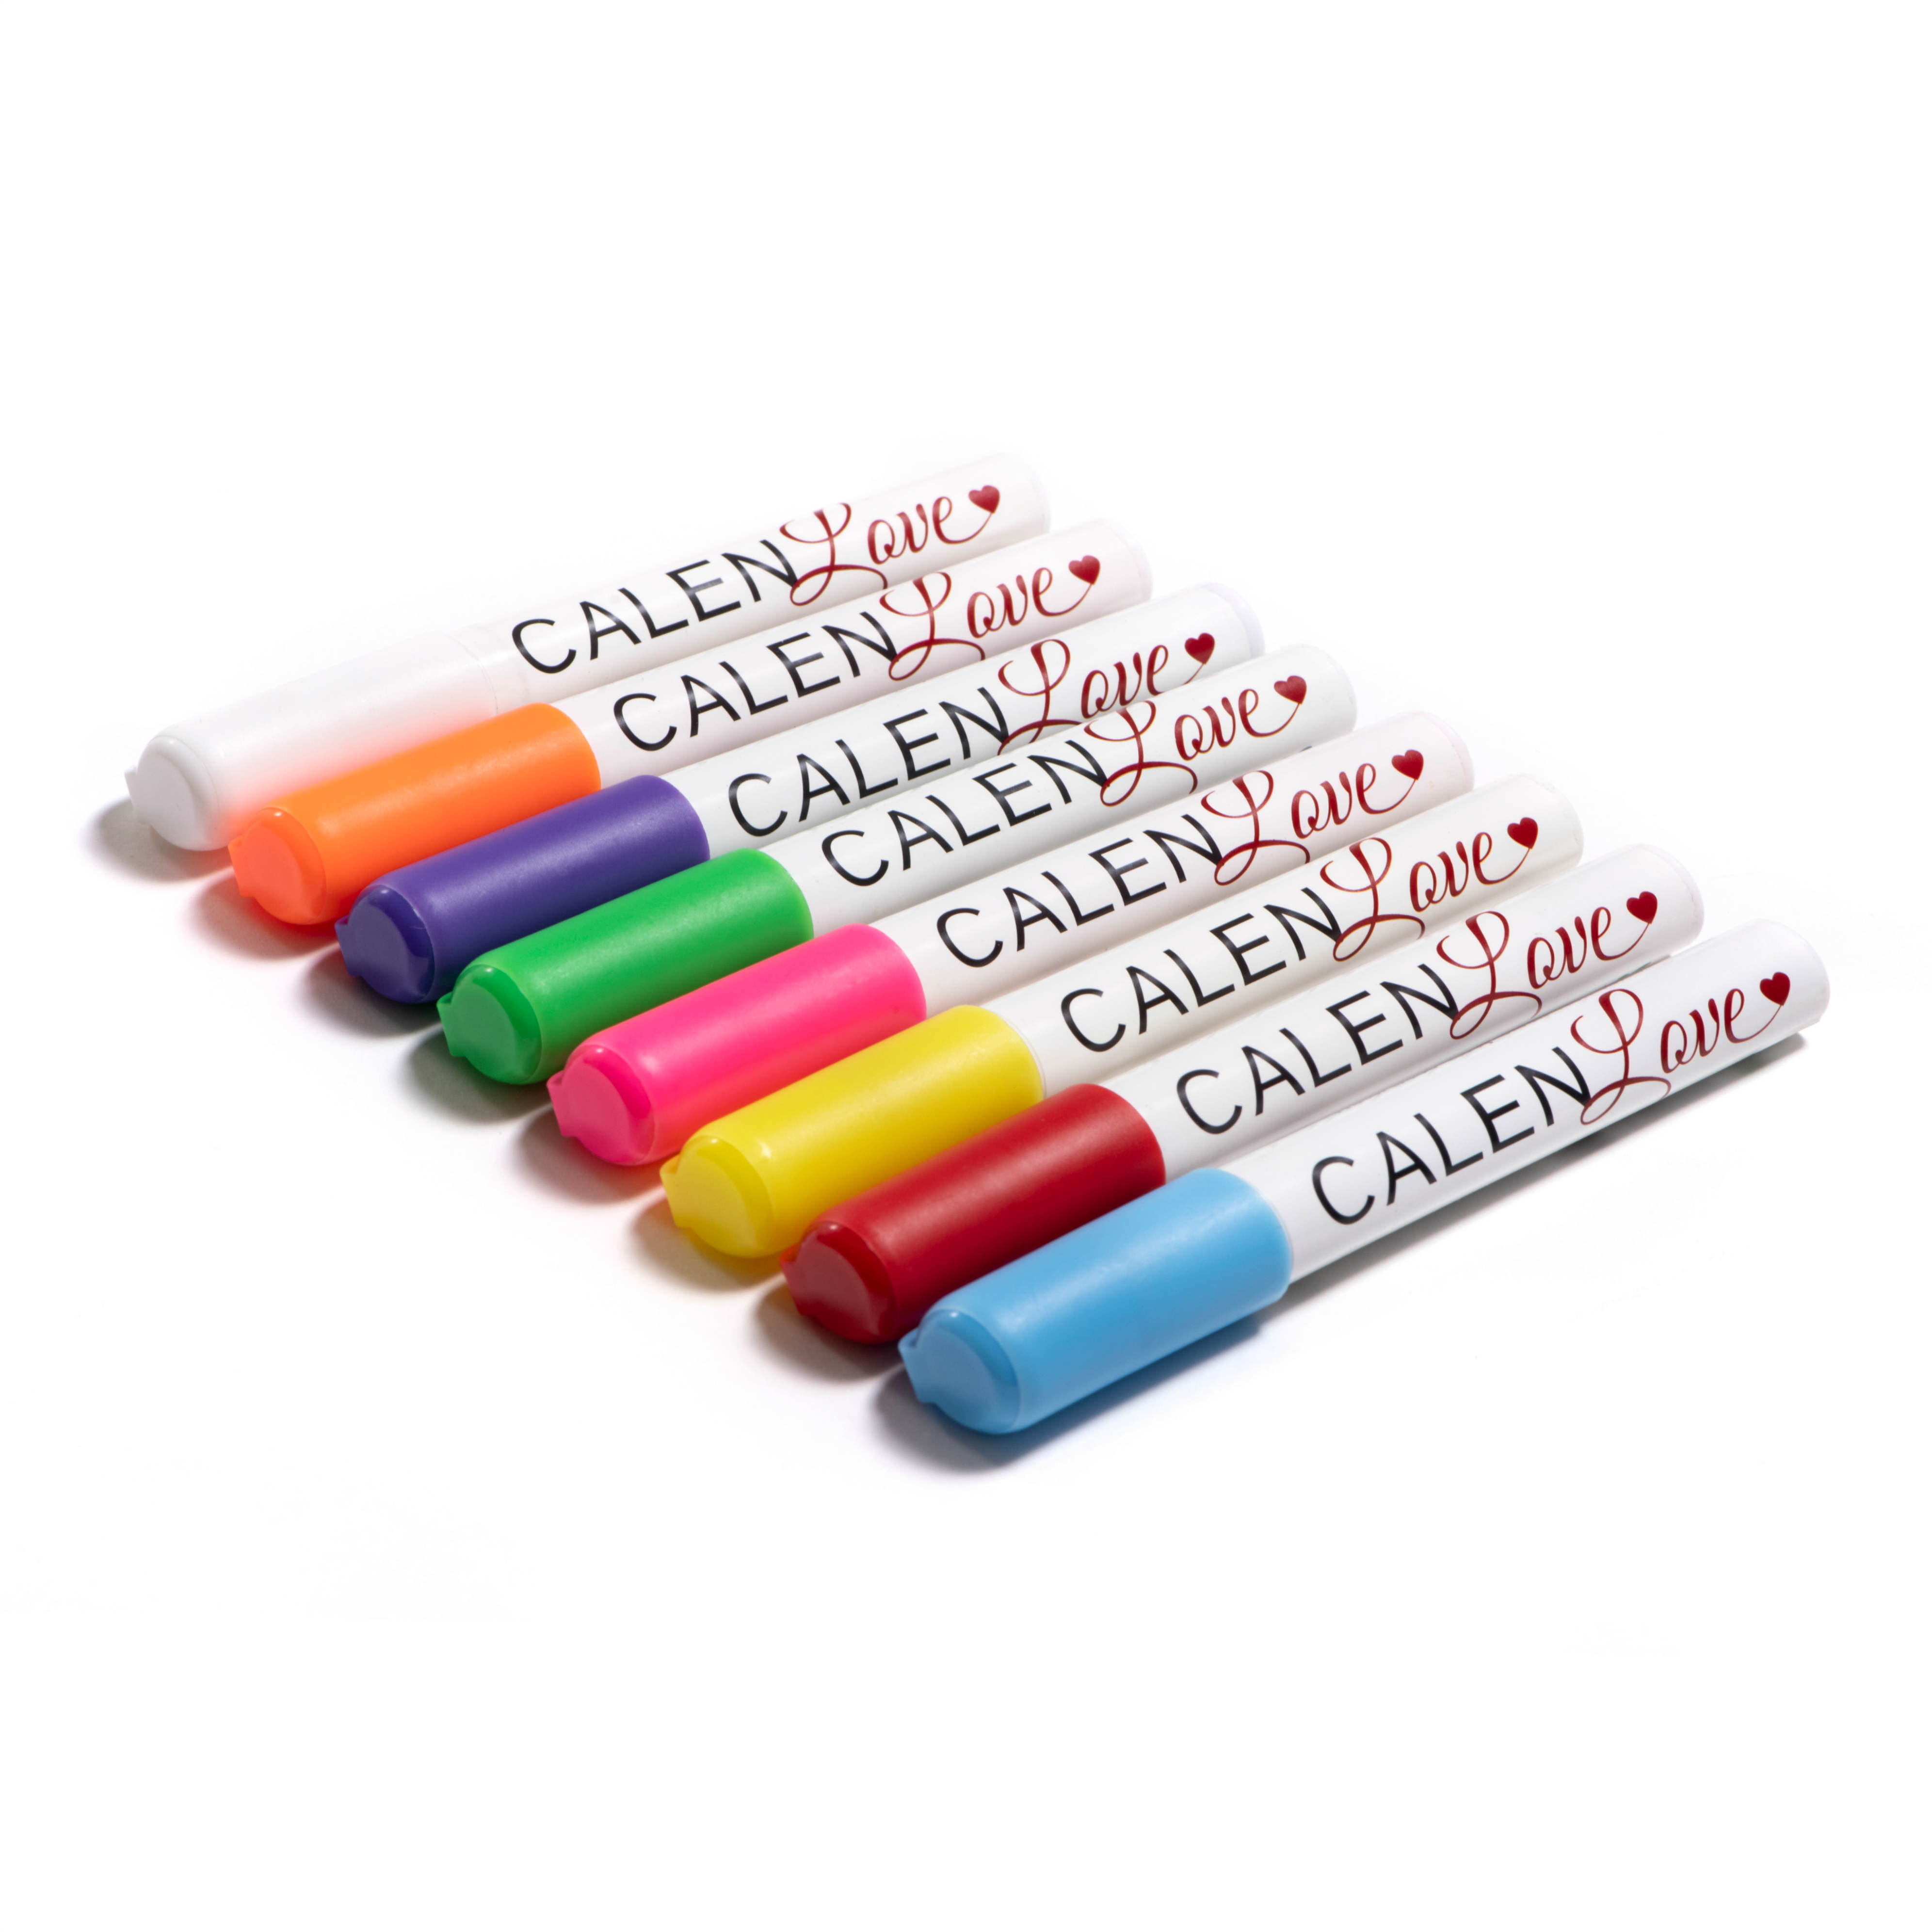 8 Pack MINI Wet-Erase Markers